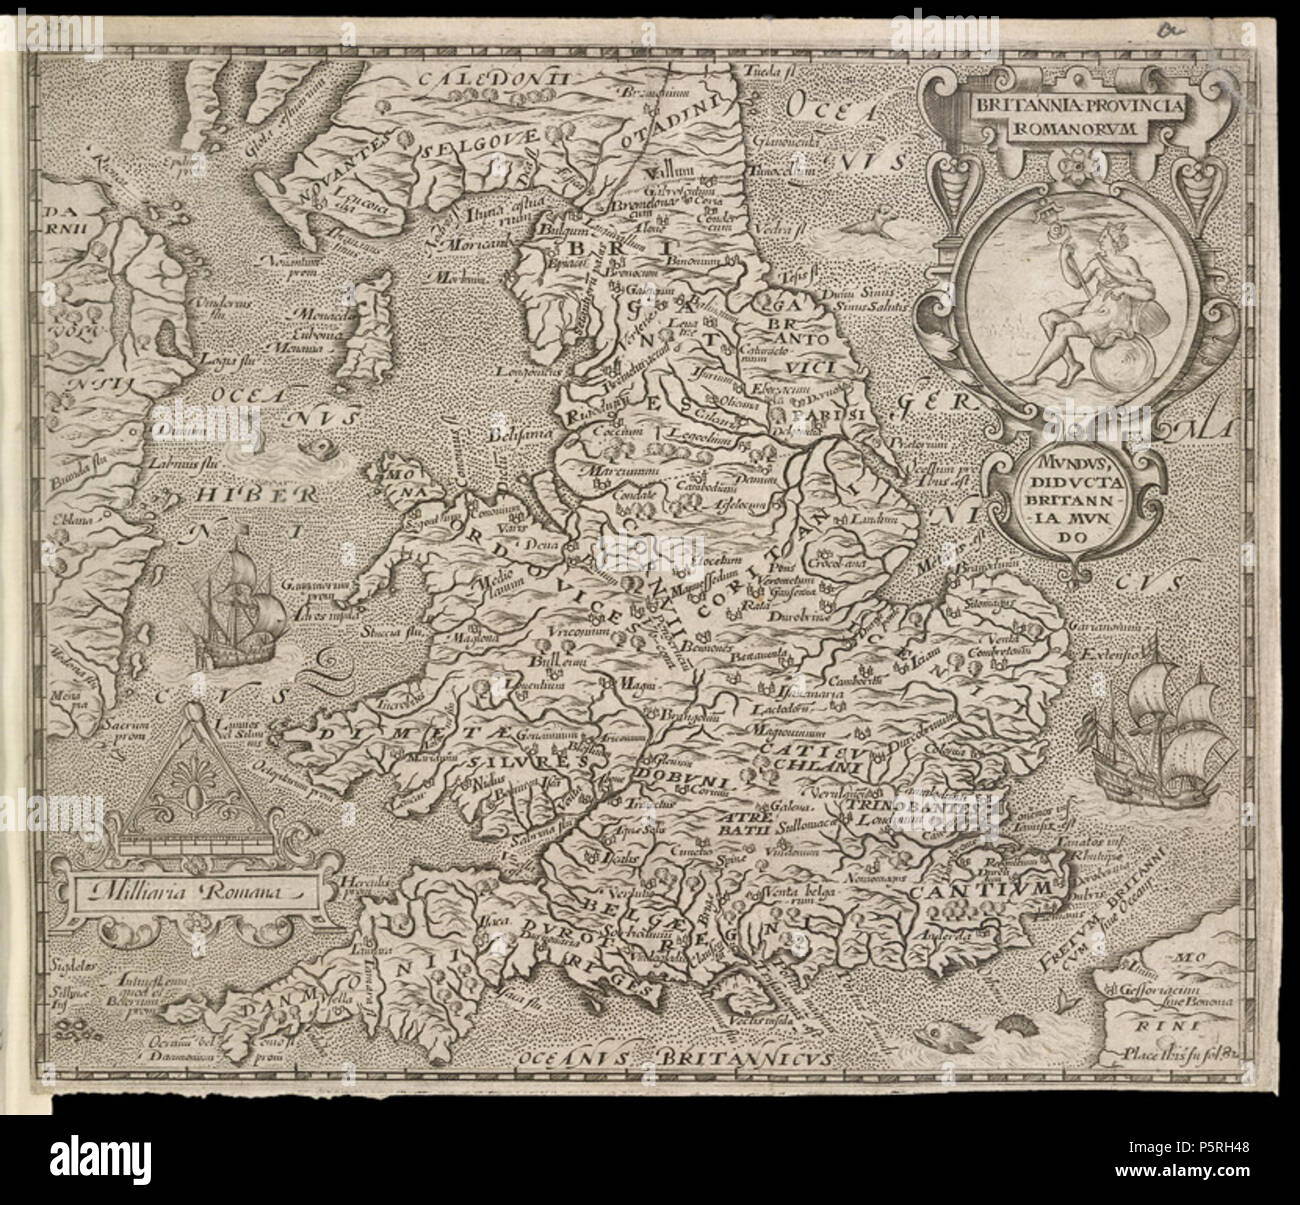 N/A. English: 'Britannia Provincia Romanorum,' engraved map by the English engraver William Rogers, made for insertion into folio 82 of William Camden's 'Britannia.' The map features a medallion of Britannia seated on a globe. Courtesy of the British Library, London. 1600.   William Rogers  (1545–1604)    Alternative names William i Rogers  Description British engraver  Date of birth/death circa 1545 circa 1604  Work period between circa 1589 and circa 1604  Work location London  Authority control  : Q2580395 VIAF:36779094 ISNI:0000 0000 4888 3843 ULAN:500027008 LCCN:nr92010537 Oxford Dict.:24 Stock Photo